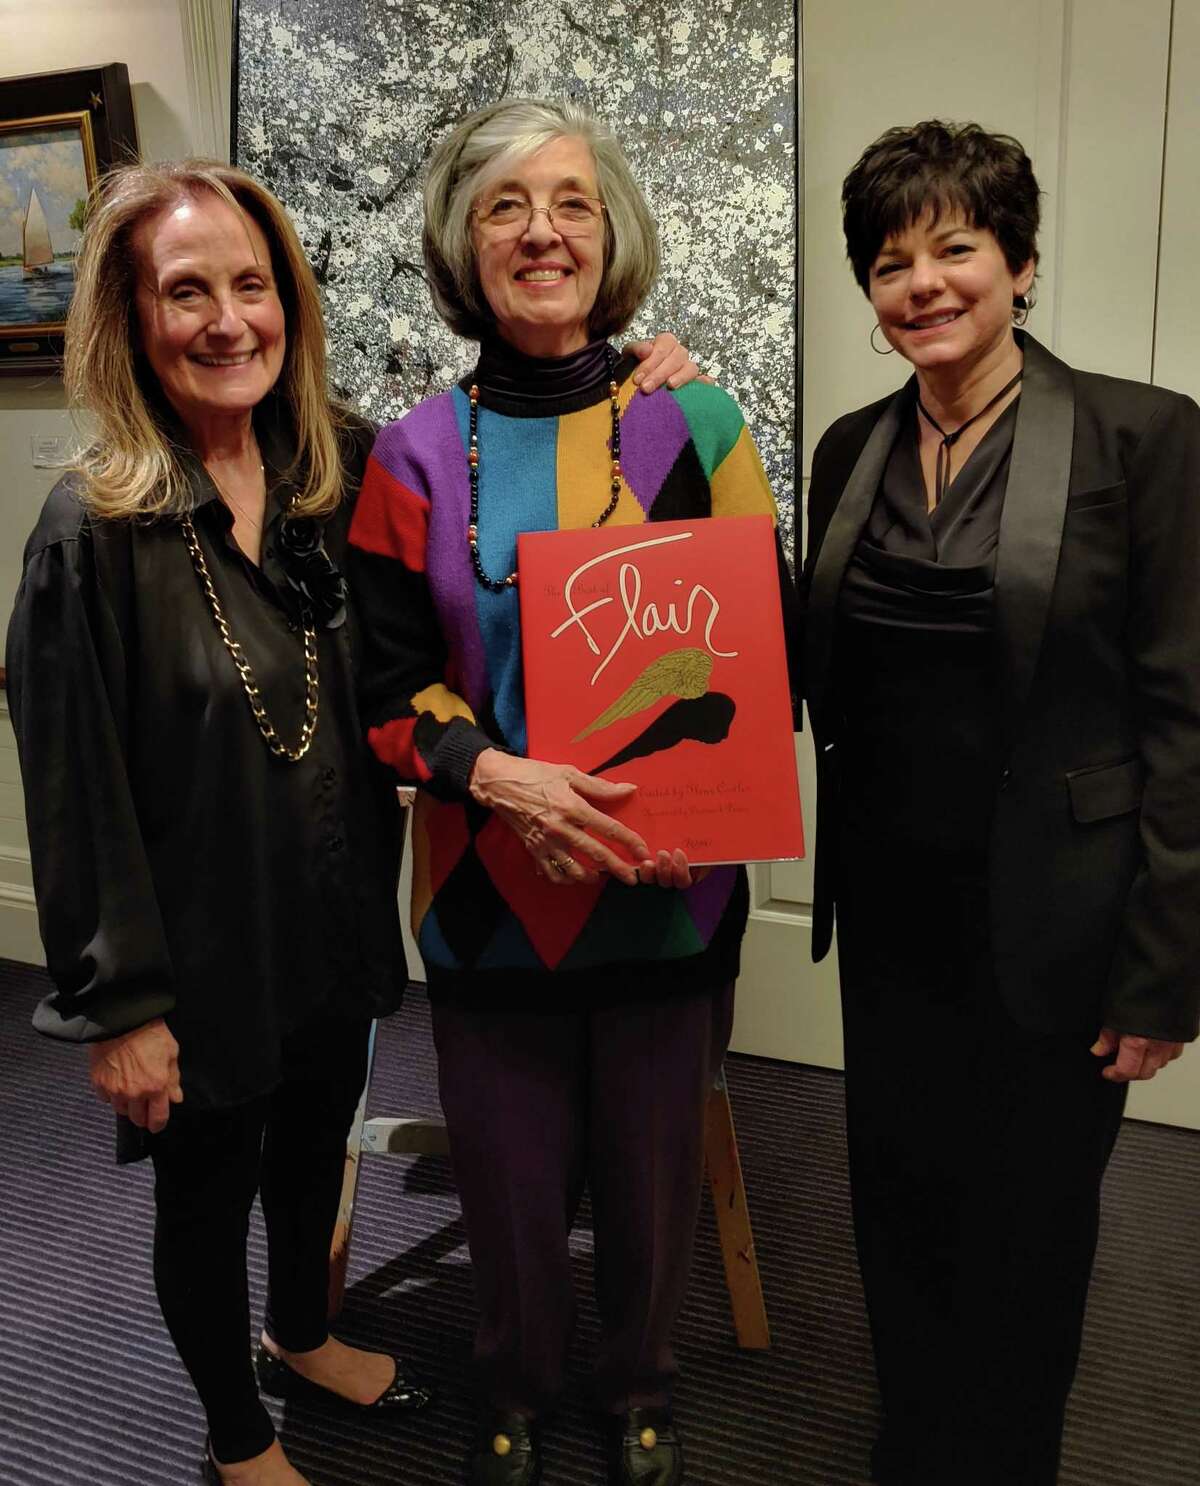 Suzanne Simpson, center, received the Art Society of Old Greenwich’s JohnTatge Memorial Volunteer of the Year Award Feb. 21 at ASOG’s 2020 Winterfest dinner and art show at the Riverside Yacht Club. ASOG co-presidents Elaine Conner, left, and Julie DiBiase presented the award for Simpson’s exceptional volunteer service in chairing the 2019 ASOG Sidewalk Show and Sale.